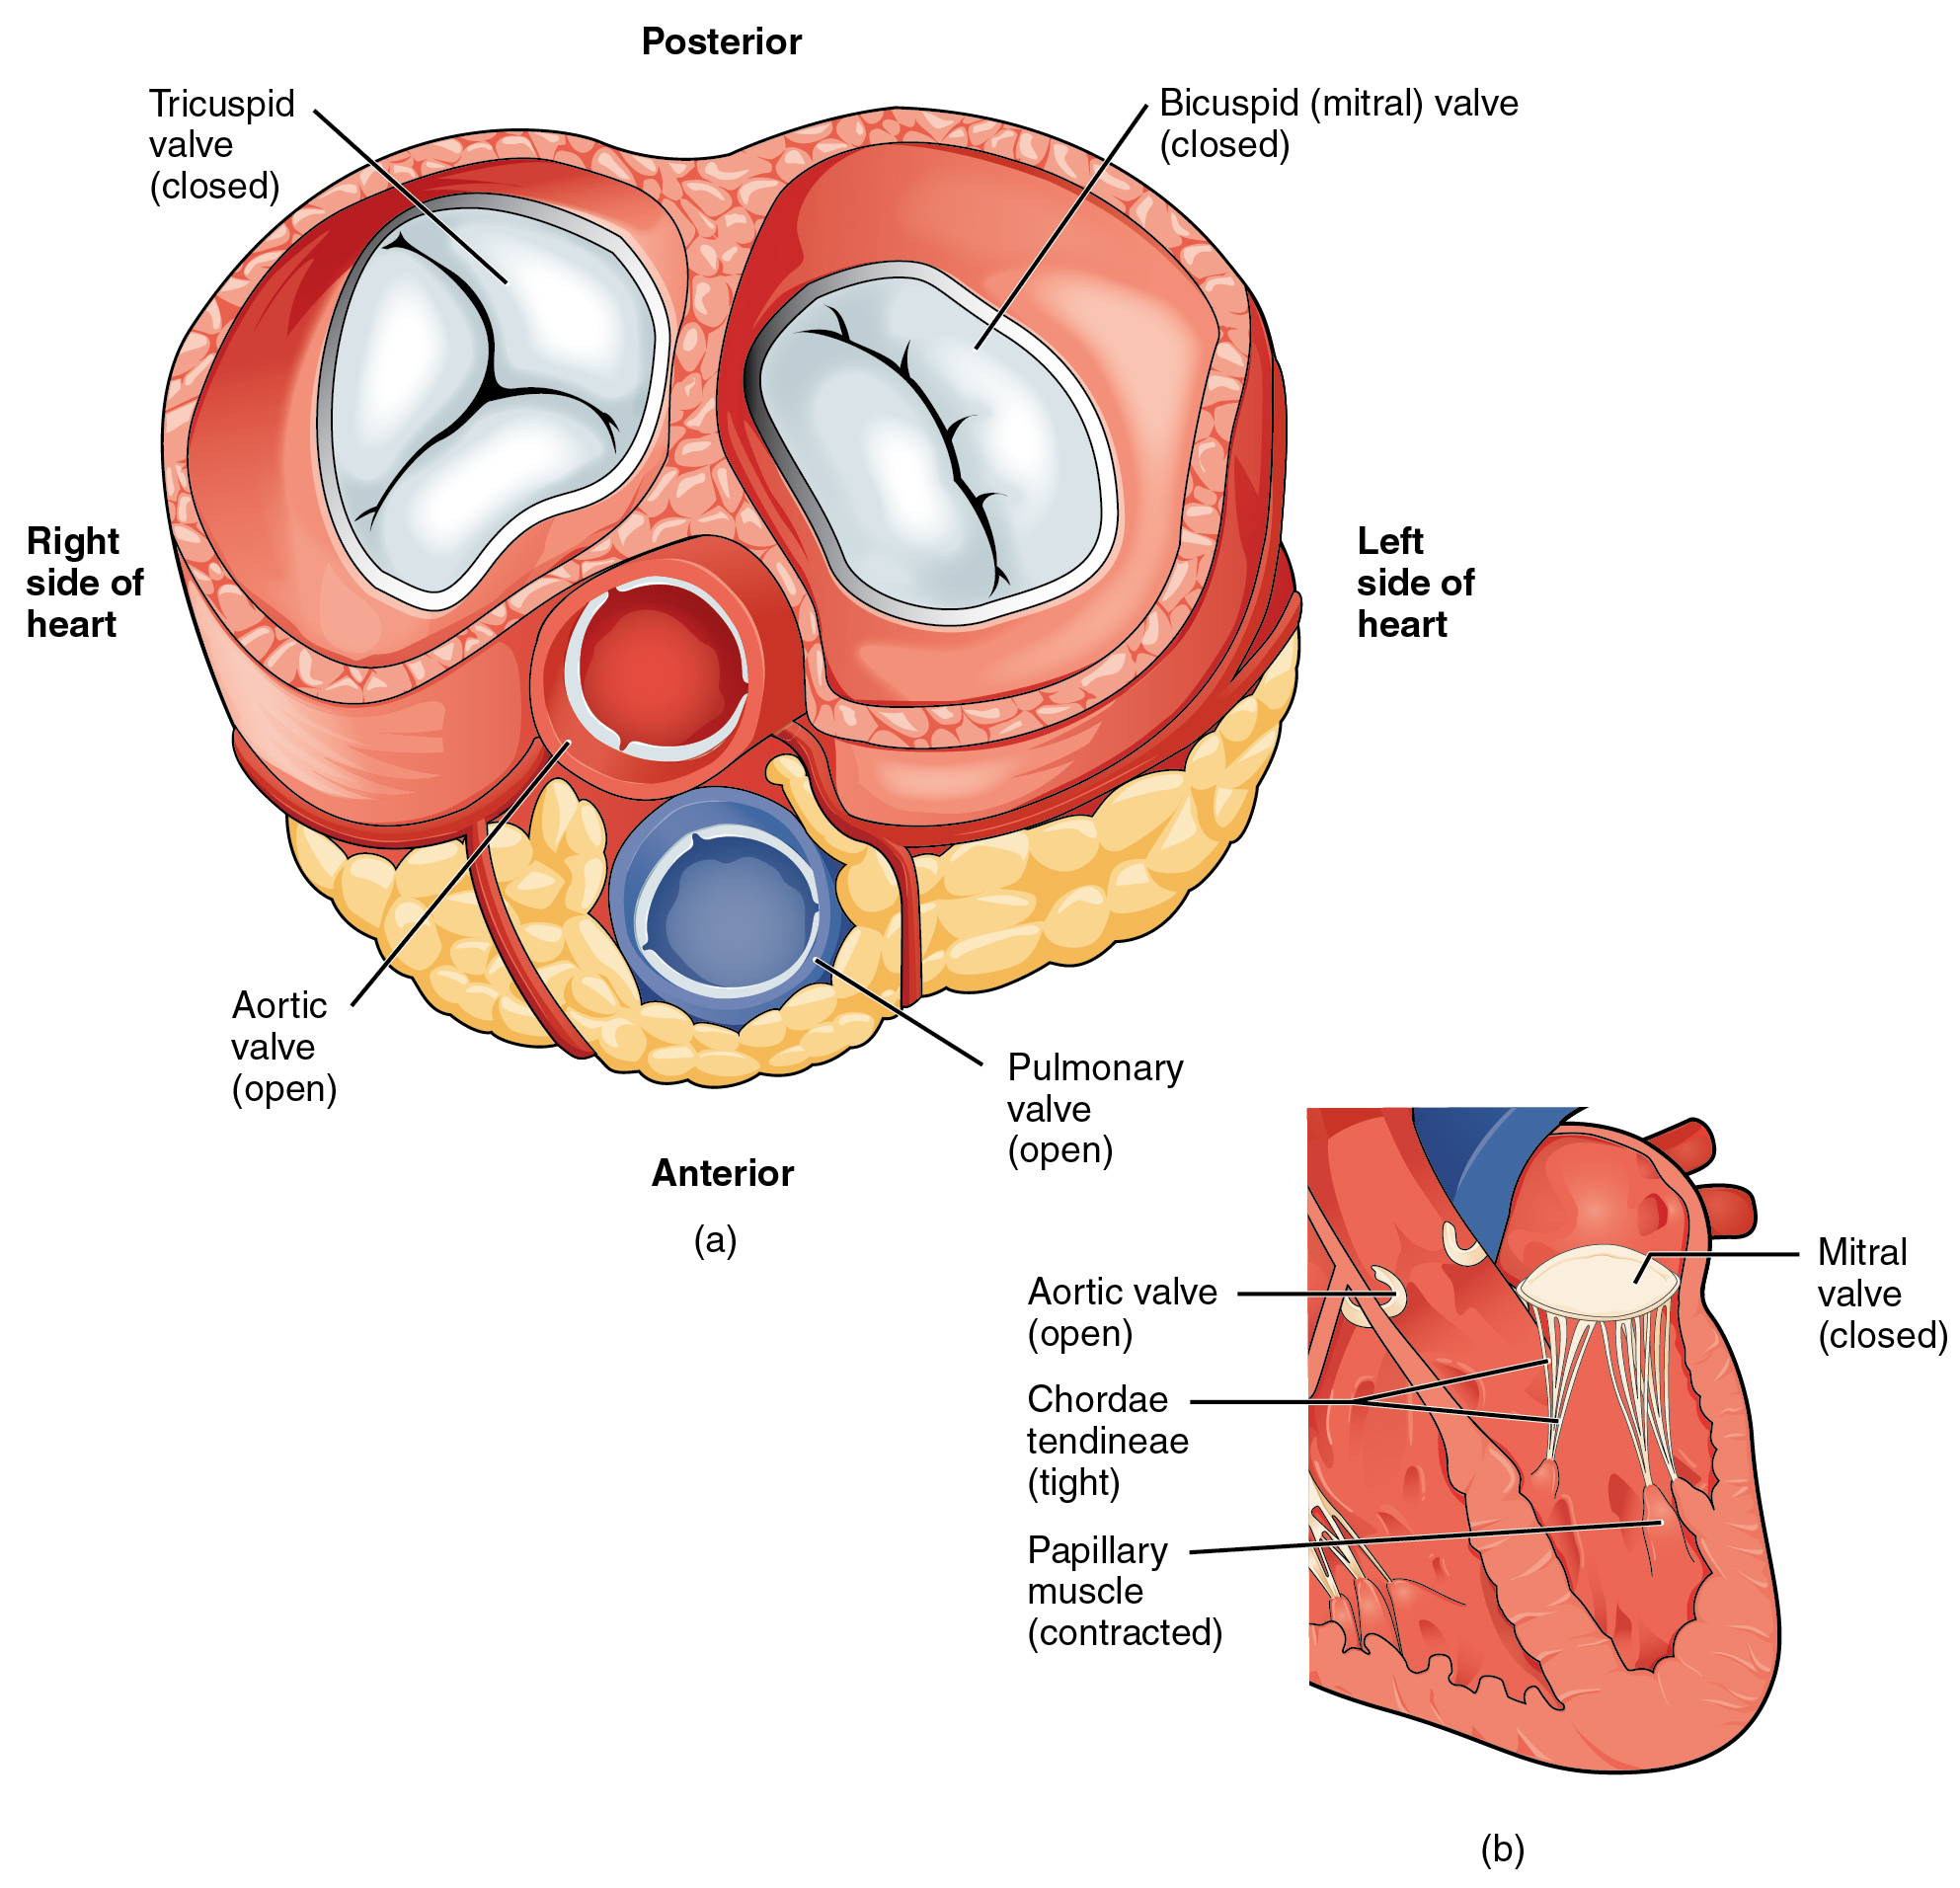 The left panel of this figure shows the anterior view of the heart with the different valves, and the right panel of this figure shows the location of the mitral valve in the closed position in the heart.